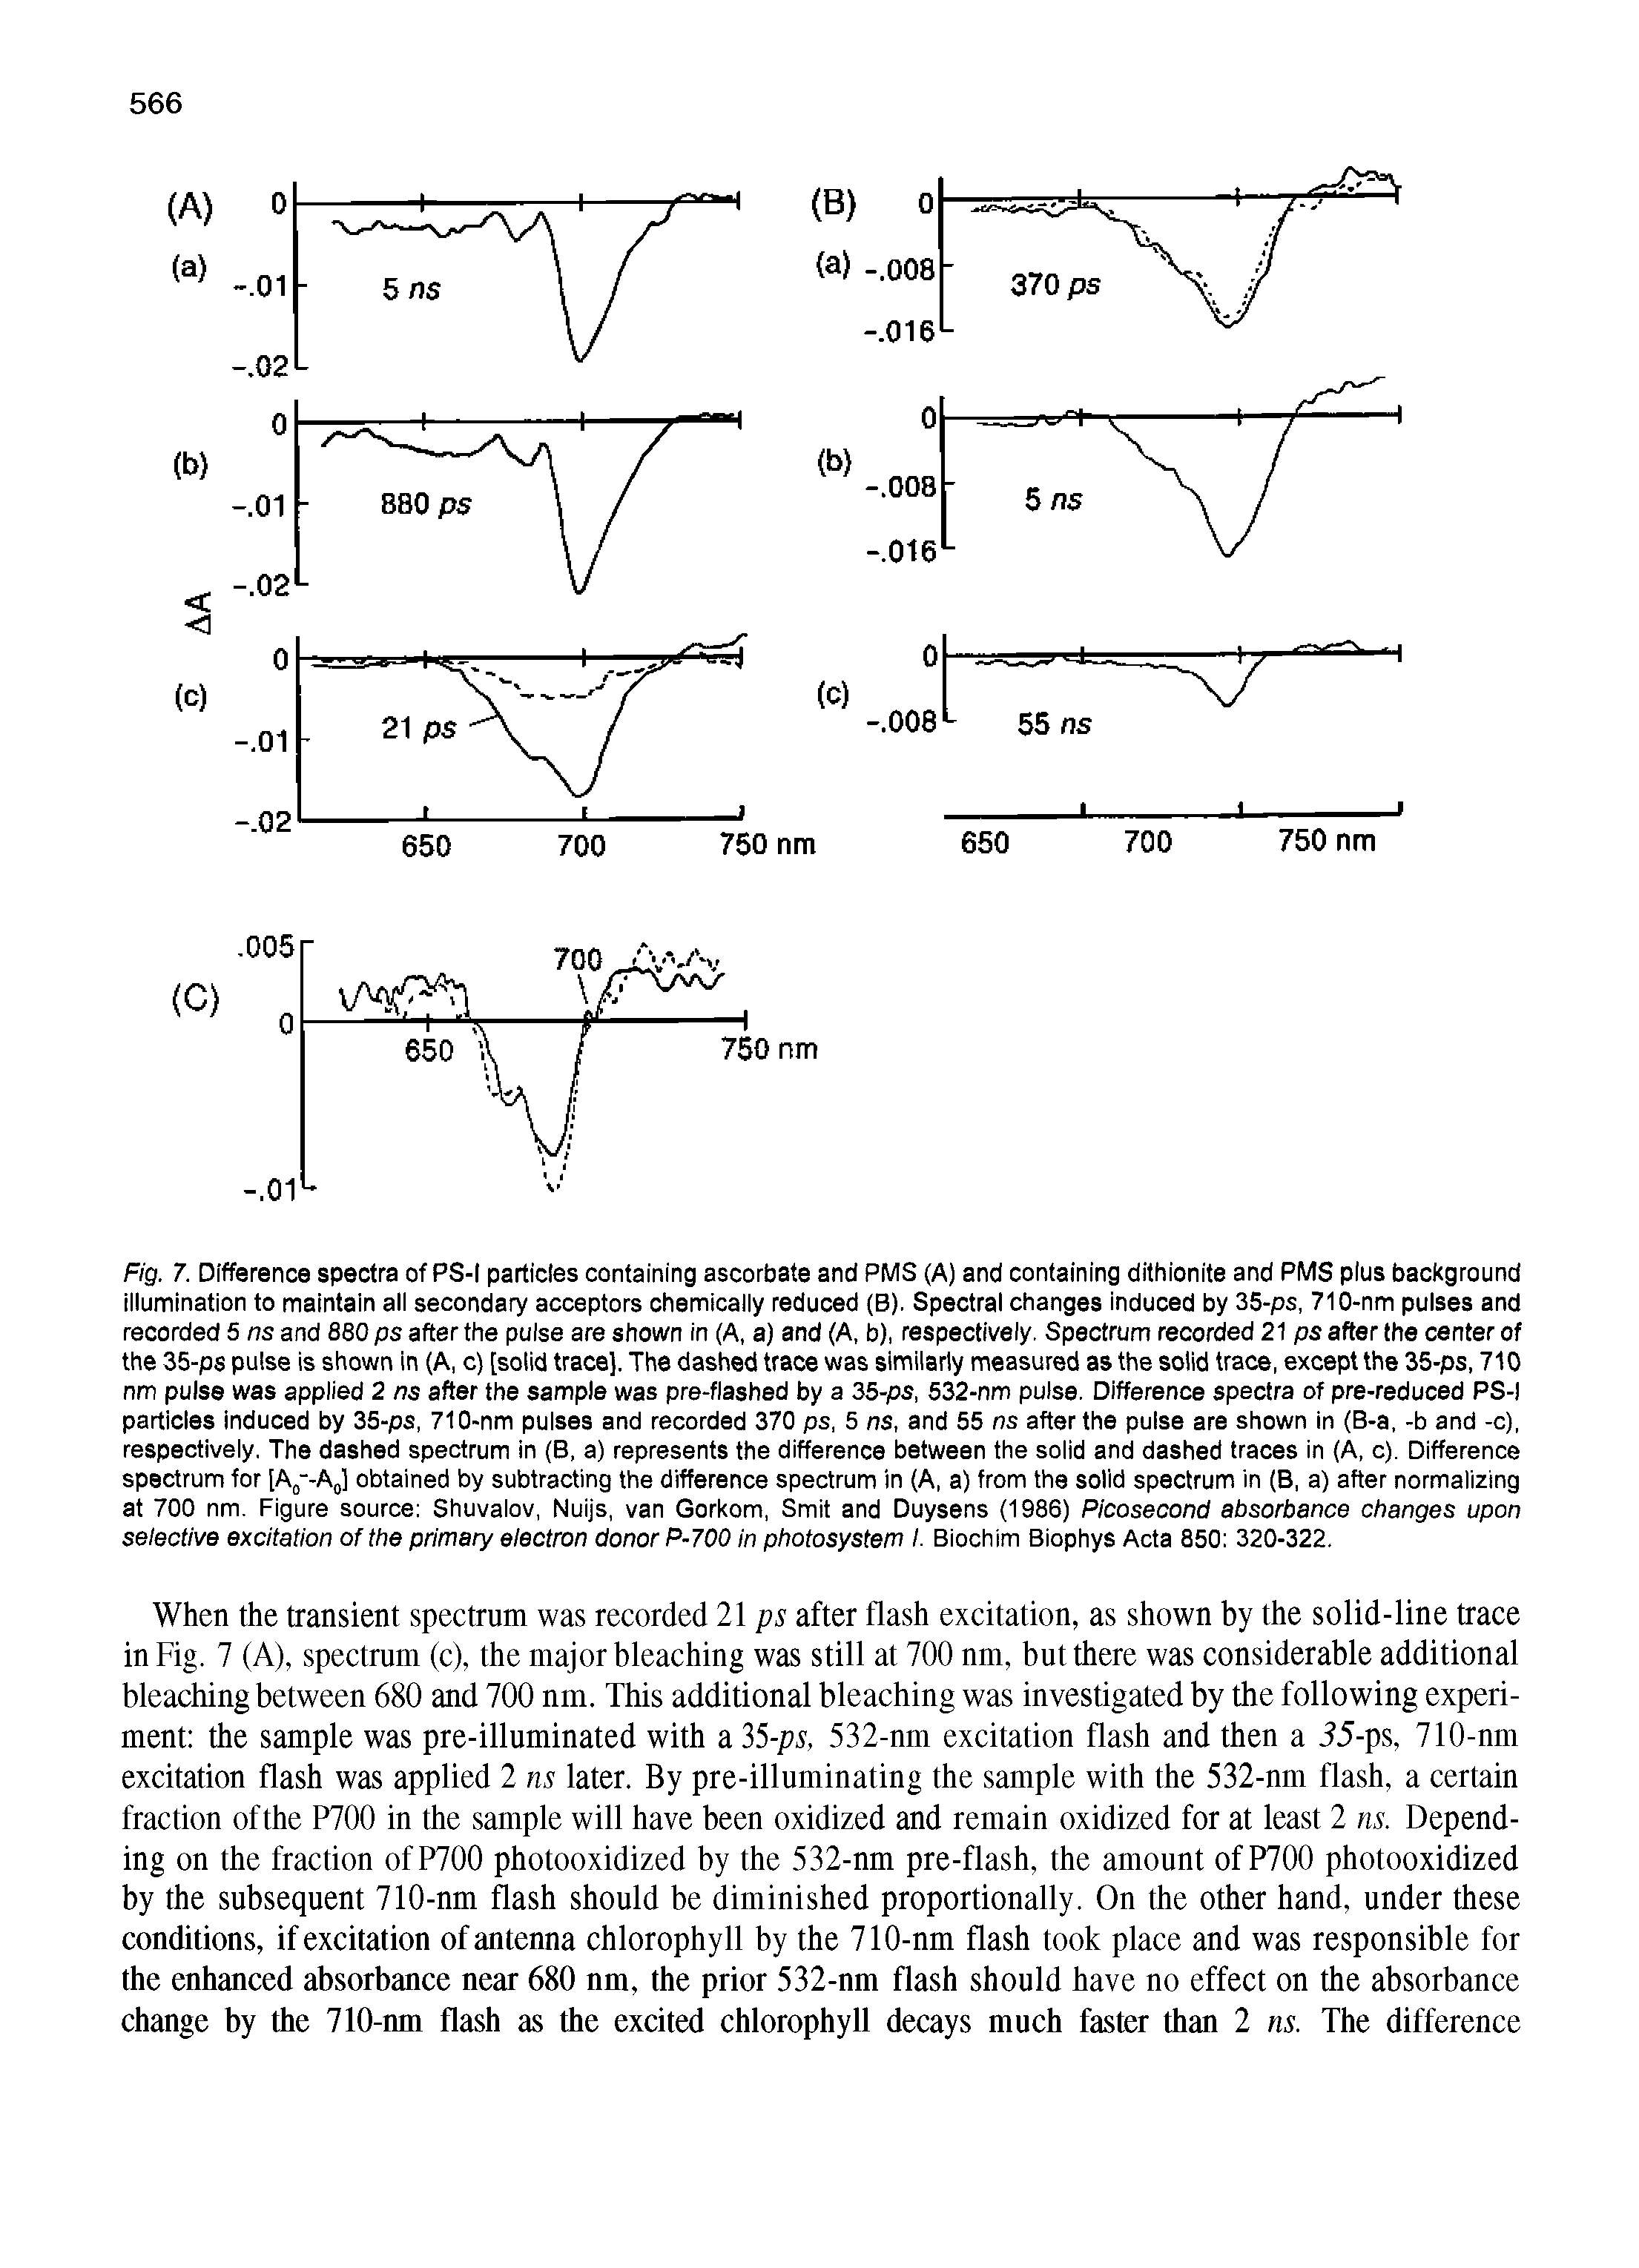 Fig. 7. Difference spectra of PS-1 particles containing ascorbate and PMS (A) and containing dithionite and PMS plus background illumination to maintain all secondary acceptors chemically reduced (B). Spectral changes induced by 35-ps, 710-nm pulses and recorded 5 ns and 860 ps after the pulse are shown in (A, a) and (A, b), respectively. Spectrum recorded 21 ps after the center of the 35-ps pulse is shown in (A, c) [solid trace]. The dashed trace was similarly measured as the solid trace, except the 35-ps, 710 nm pulse was applied 2 ns after the sample was pre-flashed by a 35-ps, 632-nm pulse. Difference spectra of pre-reduced PS-1 particles induced by 35-ps, 710-nm pulses and recorded 370 ps, 5 ns, and 55 ns after the pulse are shown in (B-a, -b and -c), respectively. The dashed spectrum in (B, a) represents the difference between the solid and dashed traces in (A, c). Difference spectrum for [A --AJ obtained by subtracting the difference spectrum in A, a) from the solid spectrum in (B, a) after normalizing at 700 nm. Figure source Shuvalov, Nuijs, van Gorkom, Smit and Duysens (1986) Picosecond absorbance changes upon selective excitation of the primary electron donor P-700 in photosystem /. Biochim Biophys Acta 850 320-322.